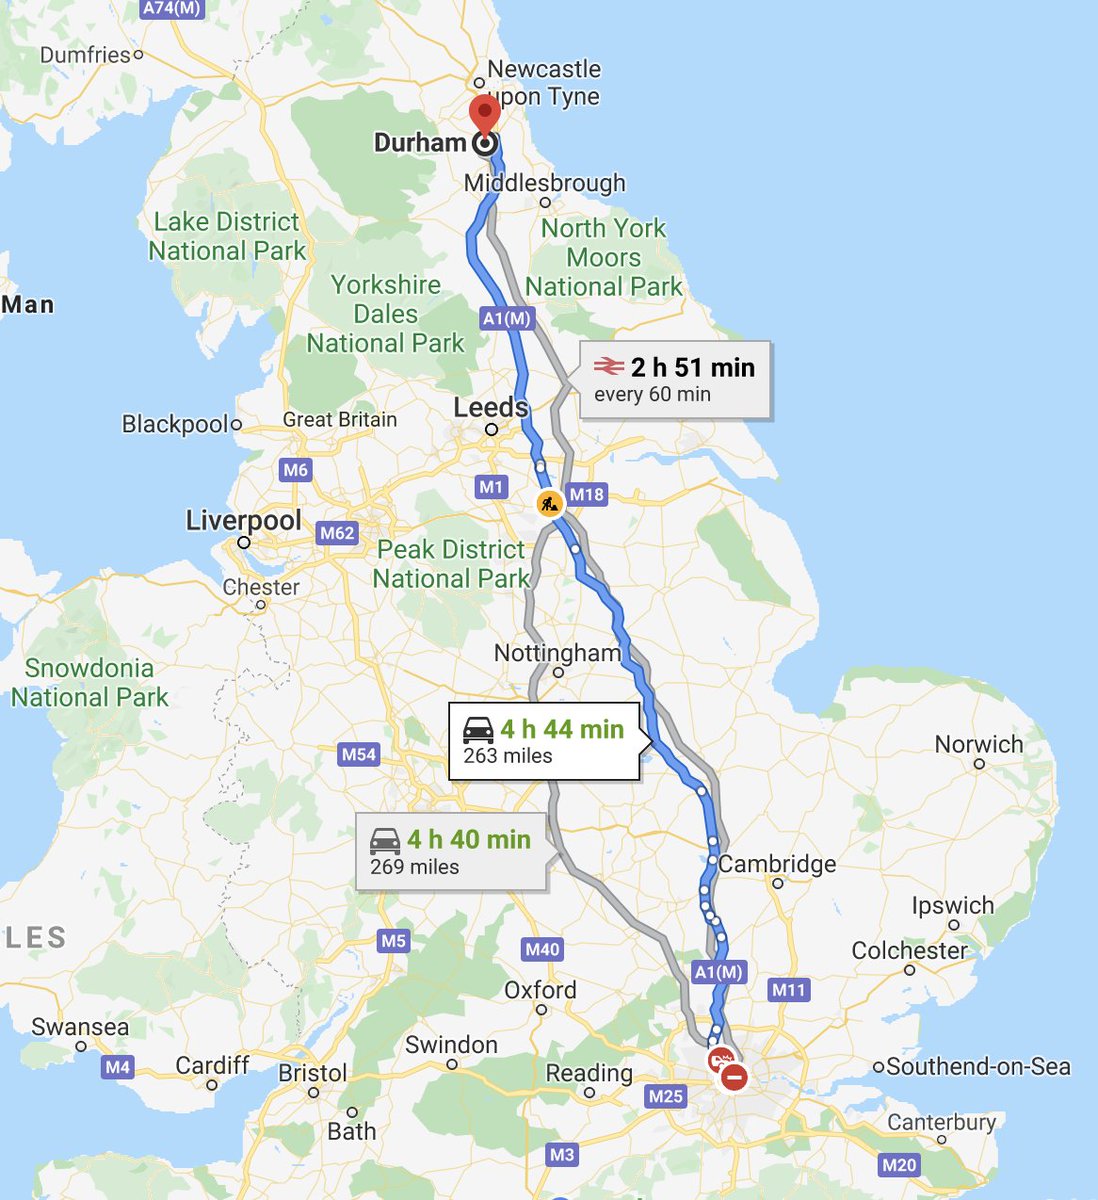 That was on March 23rd. A few days later, Dominic's wife gets sick. And then he gets sick. So what does he do? He gets in his car and goes from London to Durham. Which is almost a WHOLE COUNTRY away. About 4-5 hours by car.